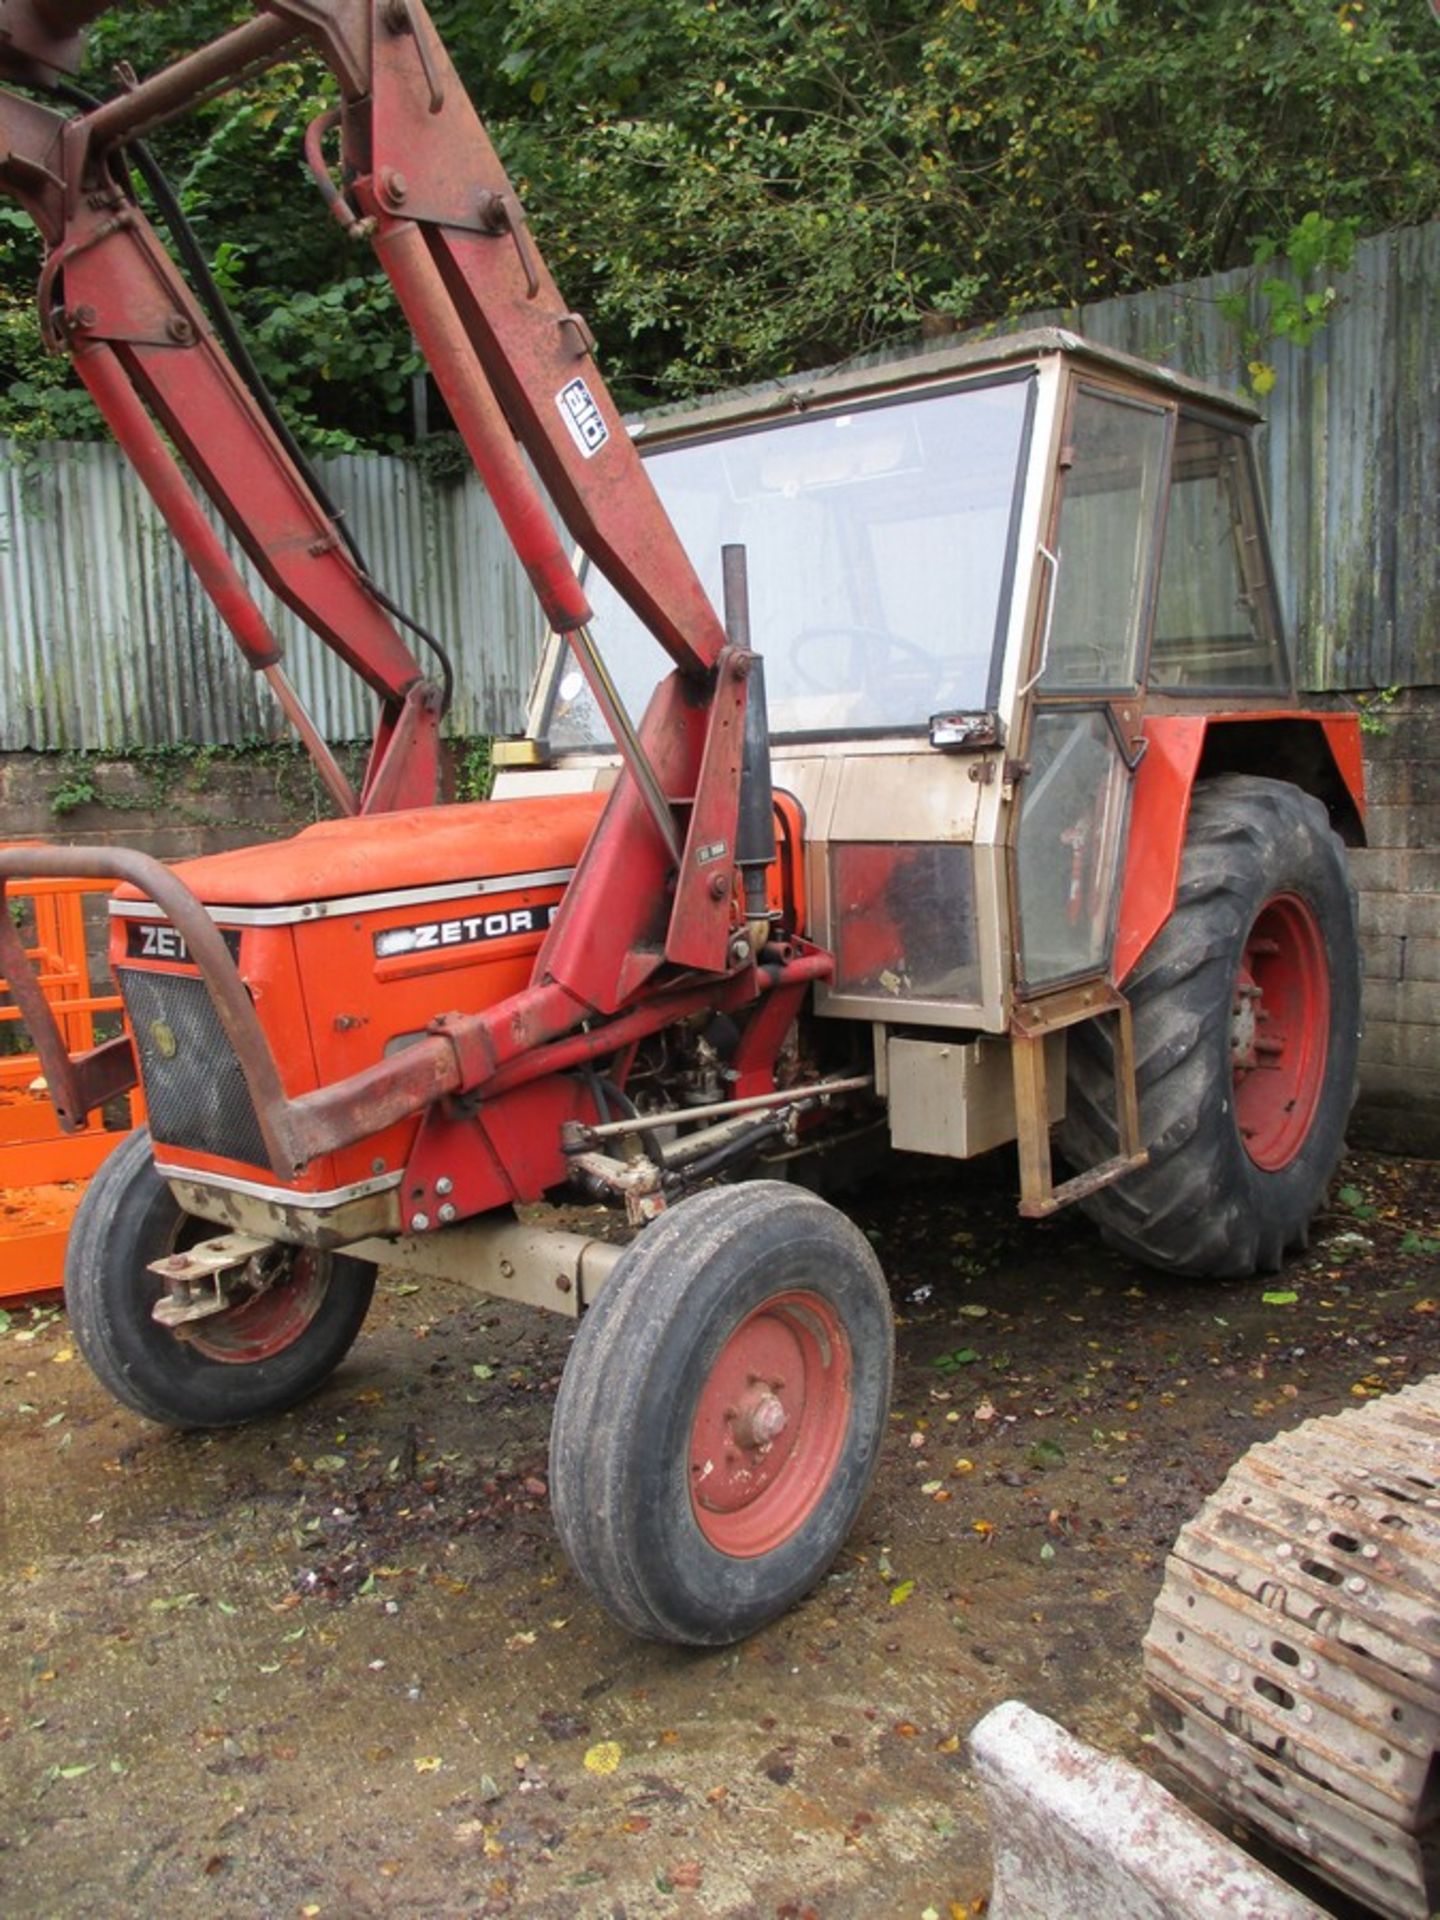 ZETOR 6911 TRACTOR C/W QUICKE LOADER & SPIKE, REAR END WEIGHT BLOCK JDC918W 0231HRS - Image 3 of 8